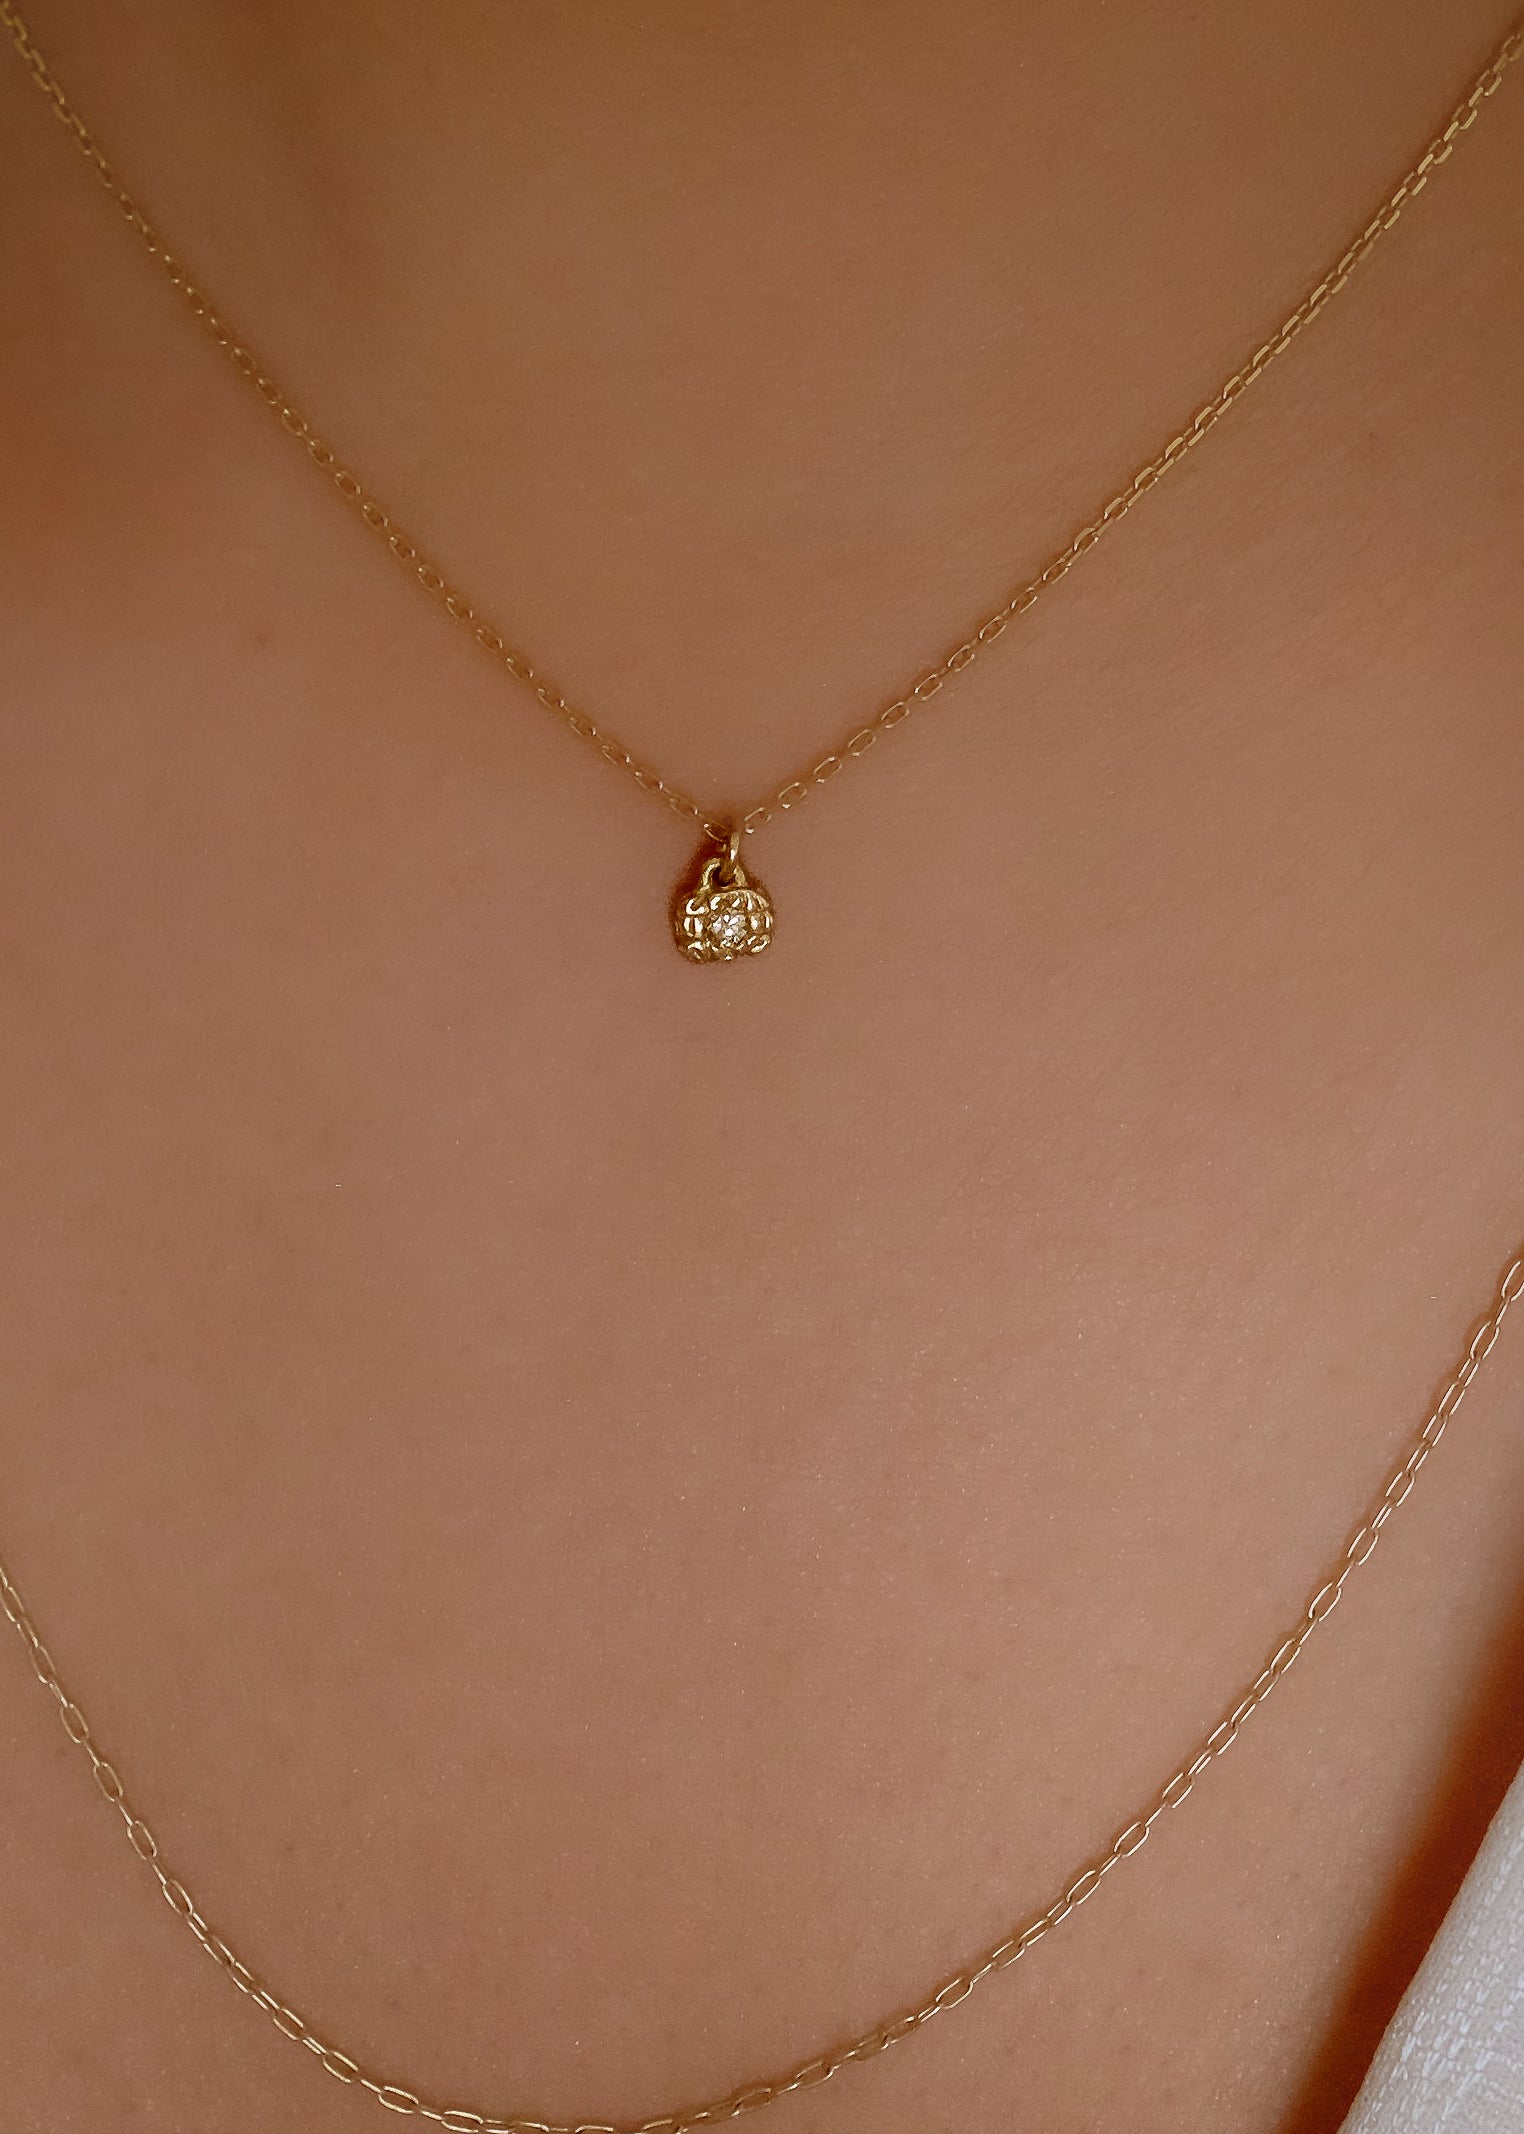 Textured gold, hand-carved to reveal its lustre, surrounds a gleaming diamond to create the Barre necklace—an essential and elegant design that calls to mind the effortless grace of a ballerina at the barre.